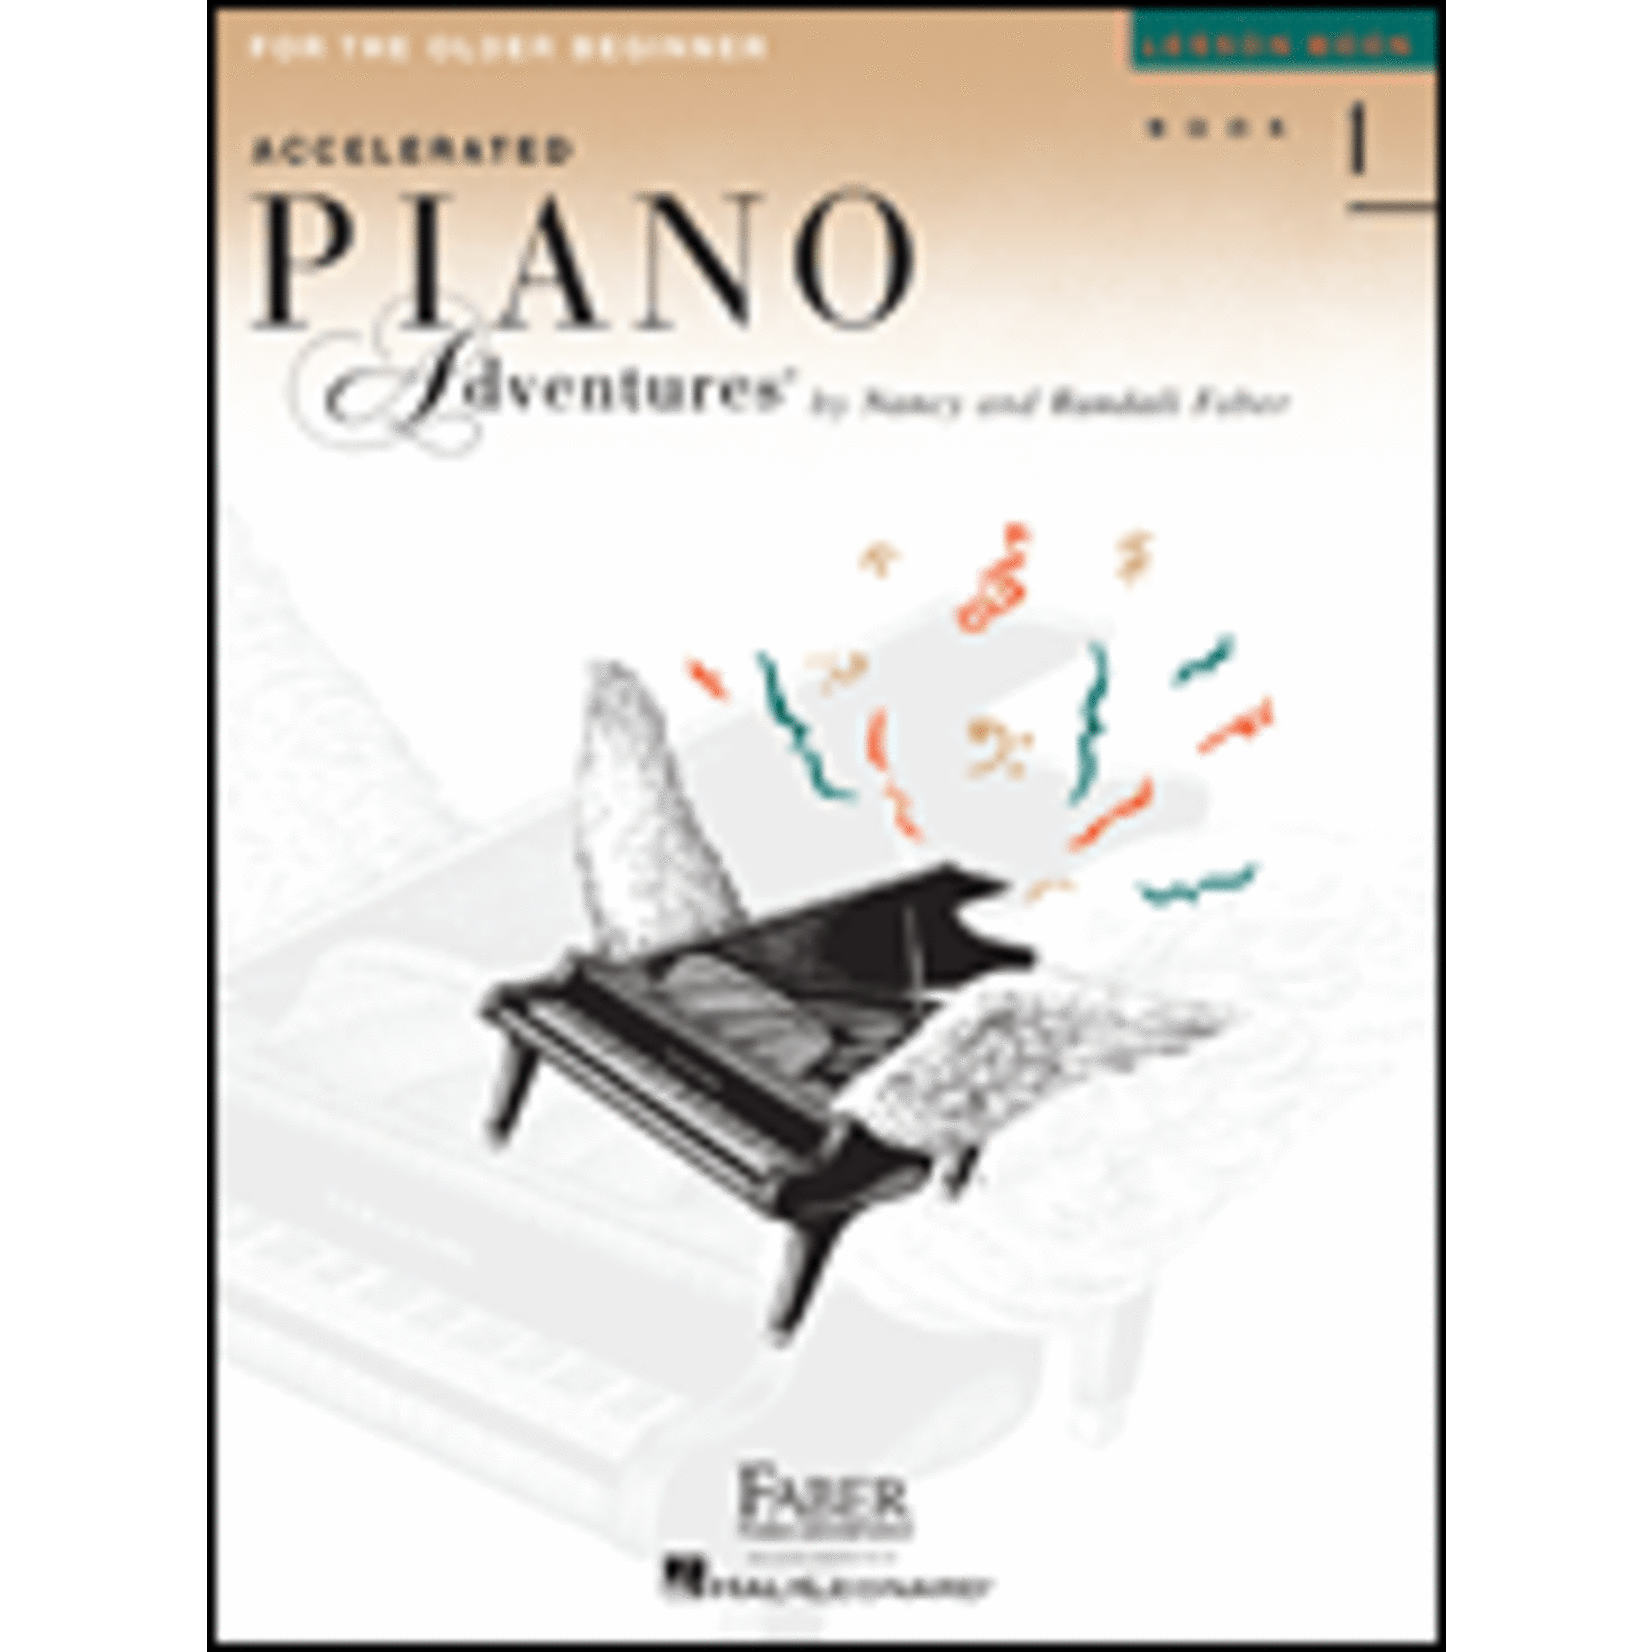 Faber Accelerated Piano Adventures for the Older Beginner Lesson 1 - Faber